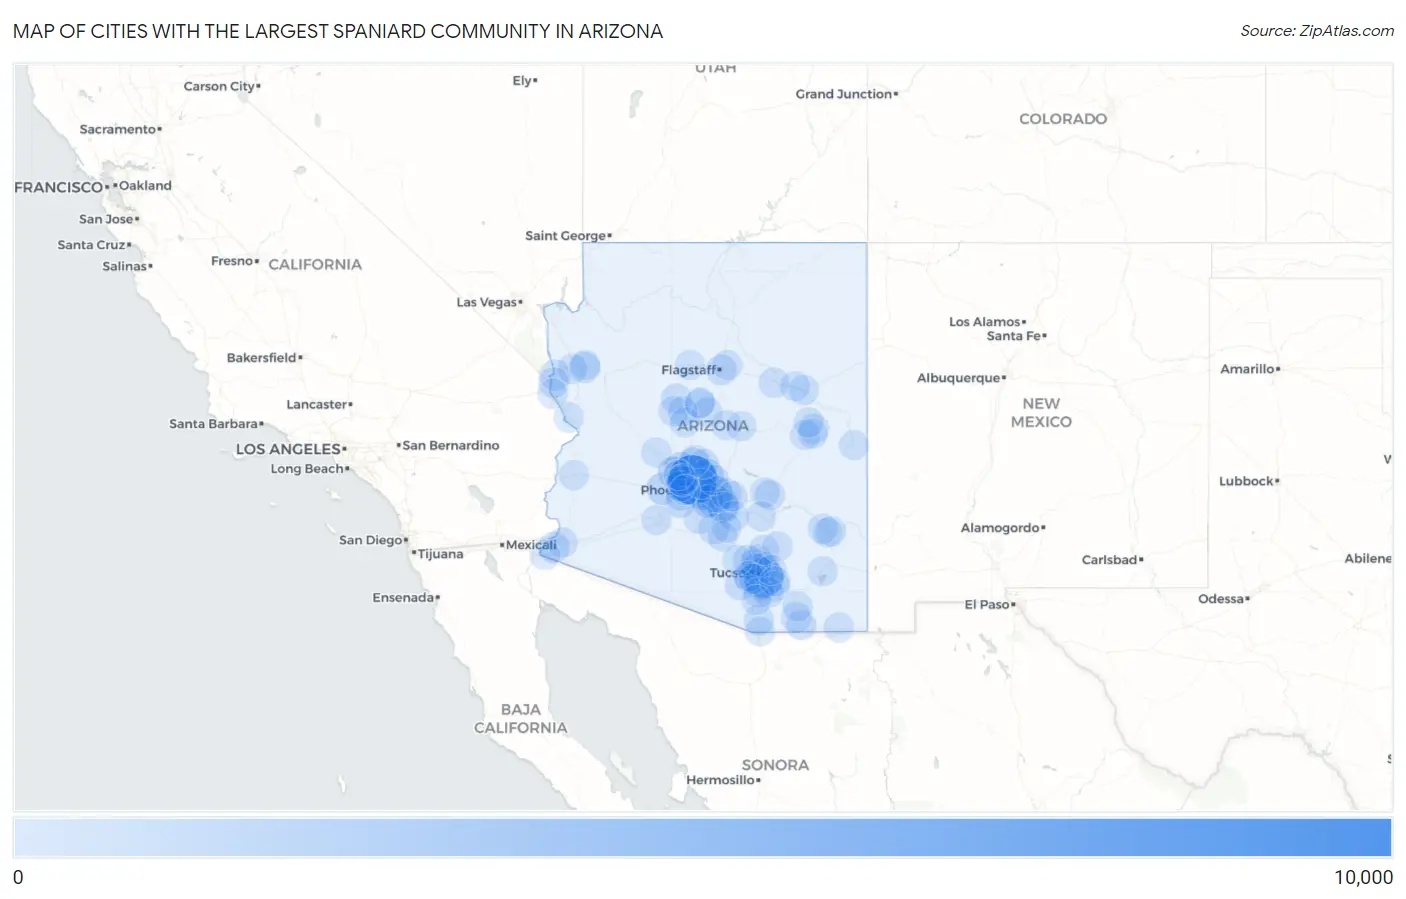 Cities with the Largest Spaniard Community in Arizona Map